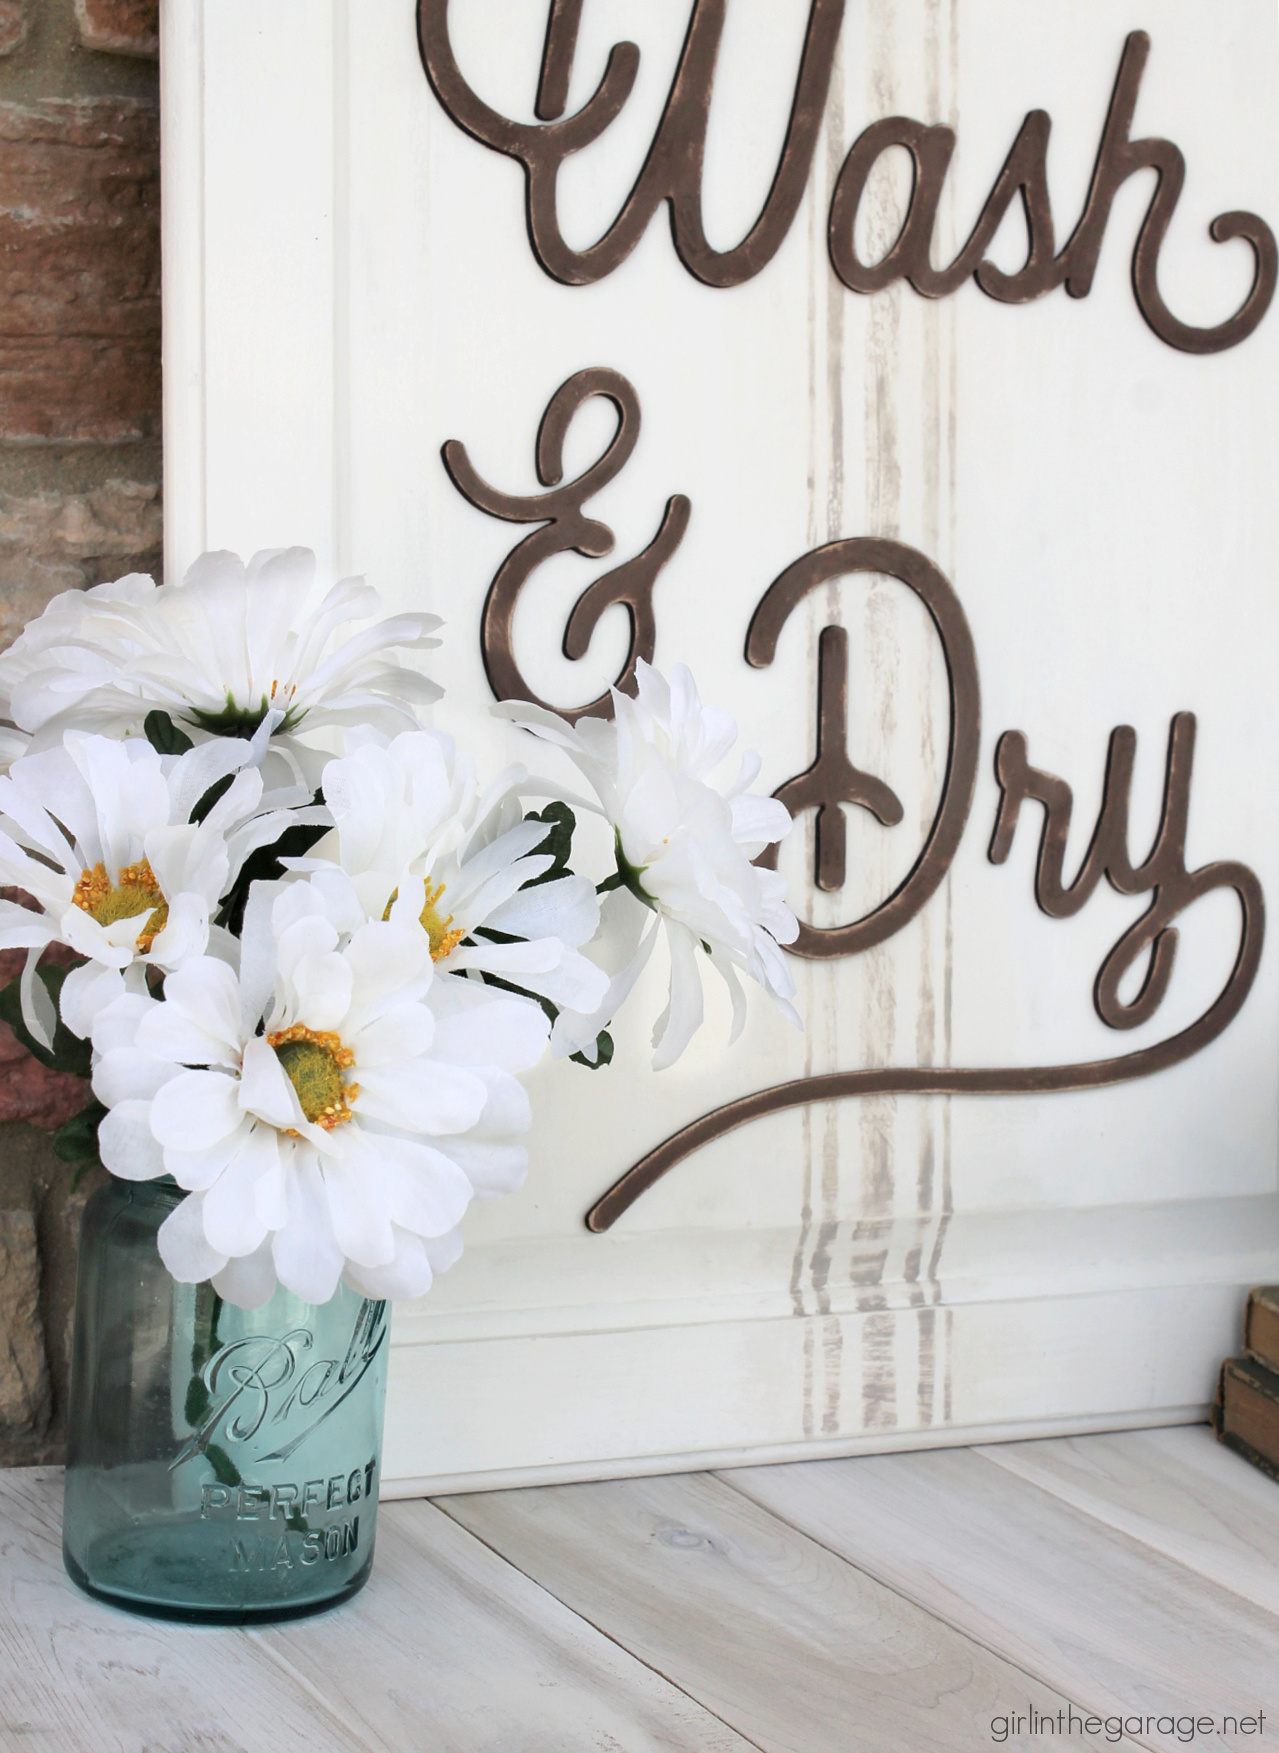 Have an old cabinet door? Learn how to repurpose it into an adorable DIY laundry room sign with grain sack stripes! By Girl in the Garage